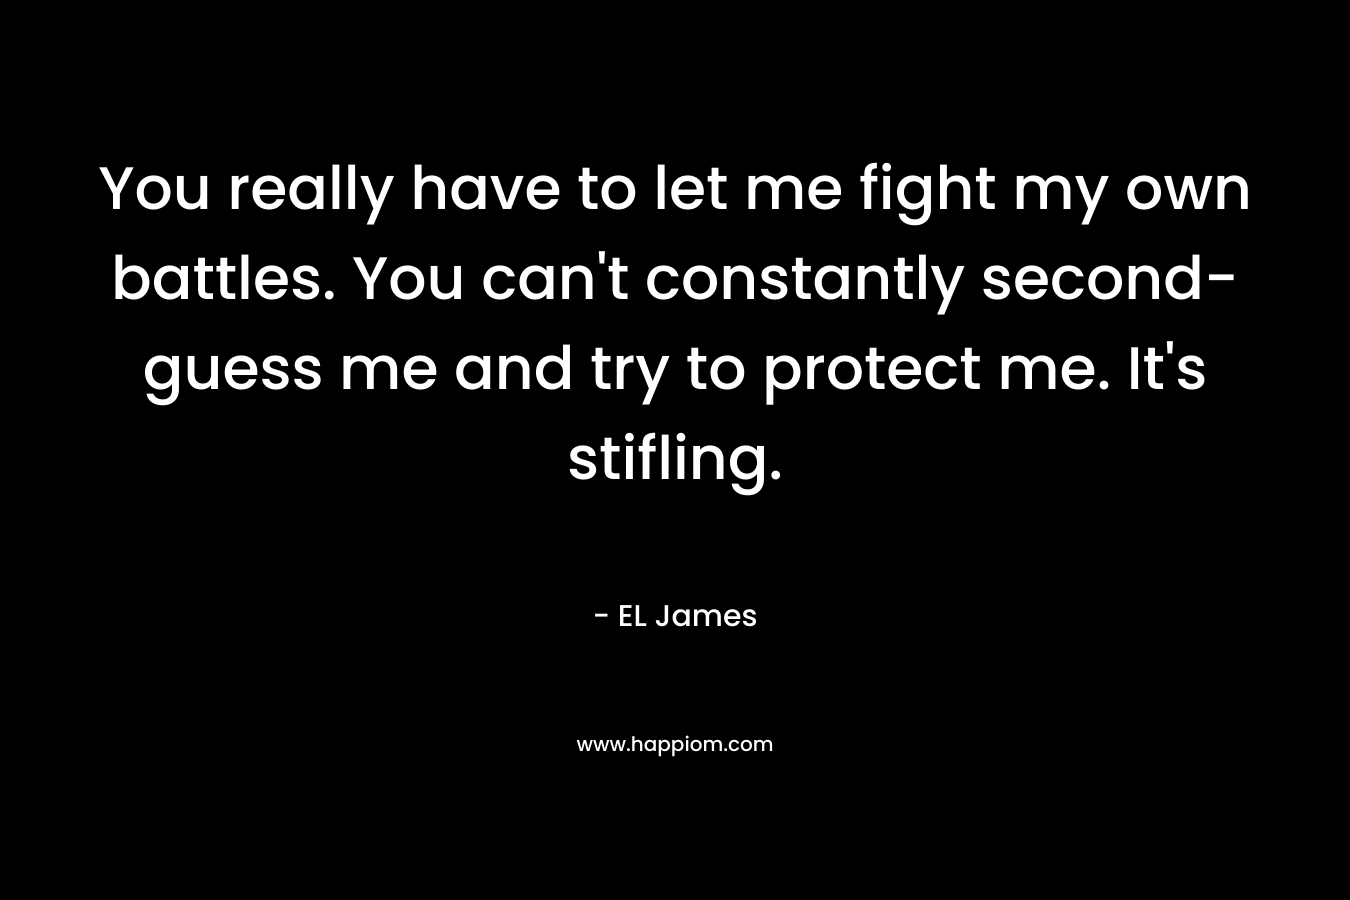 You really have to let me fight my own battles. You can’t constantly second-guess me and try to protect me. It’s stifling. – EL James